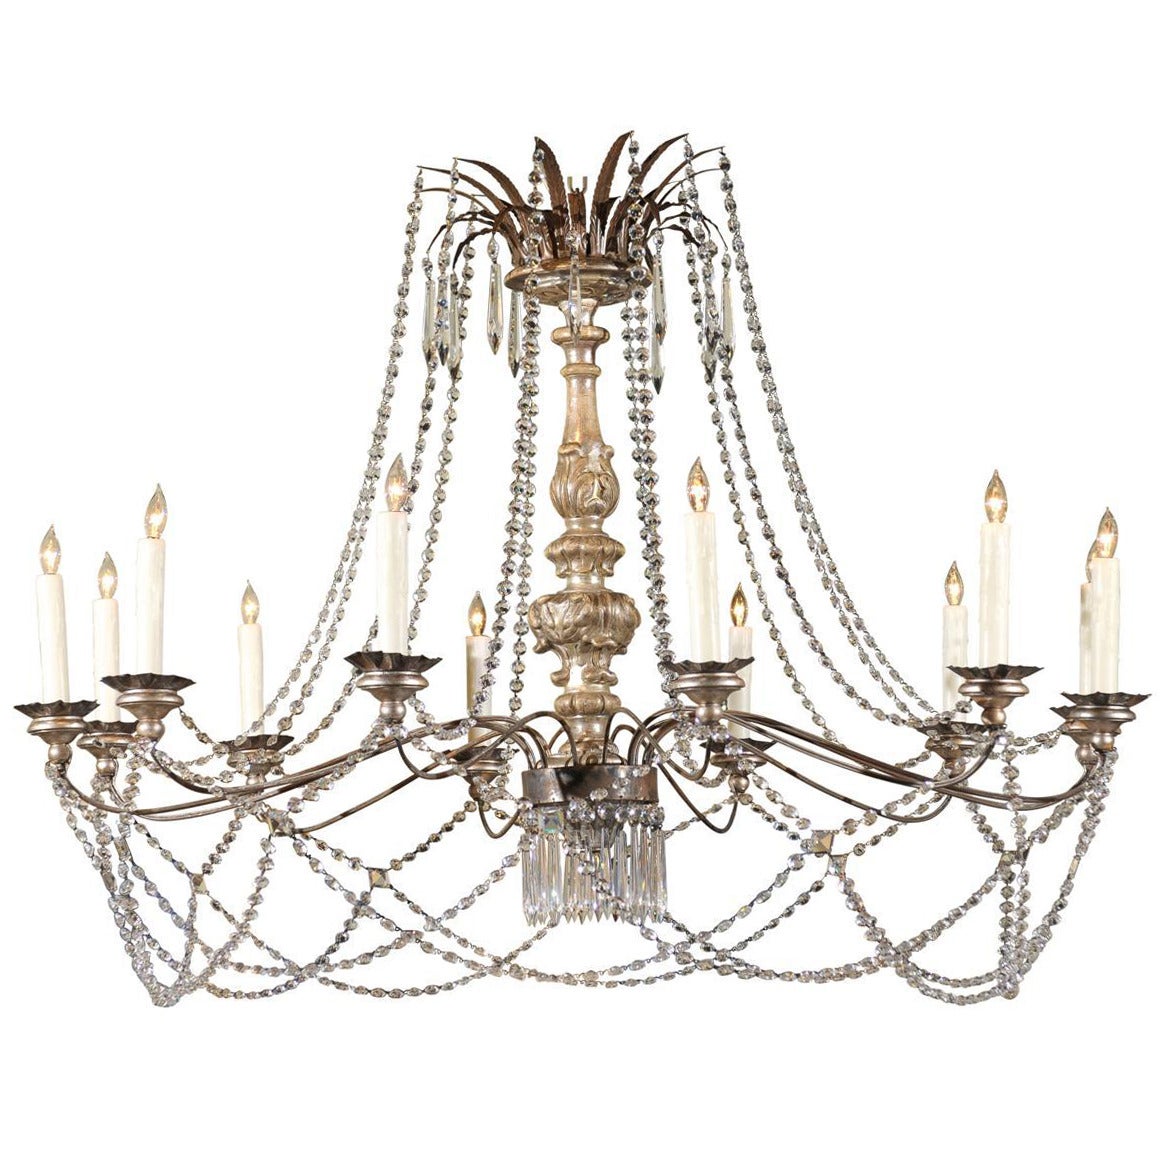 Silver Giltwood and Crystal Chandelier